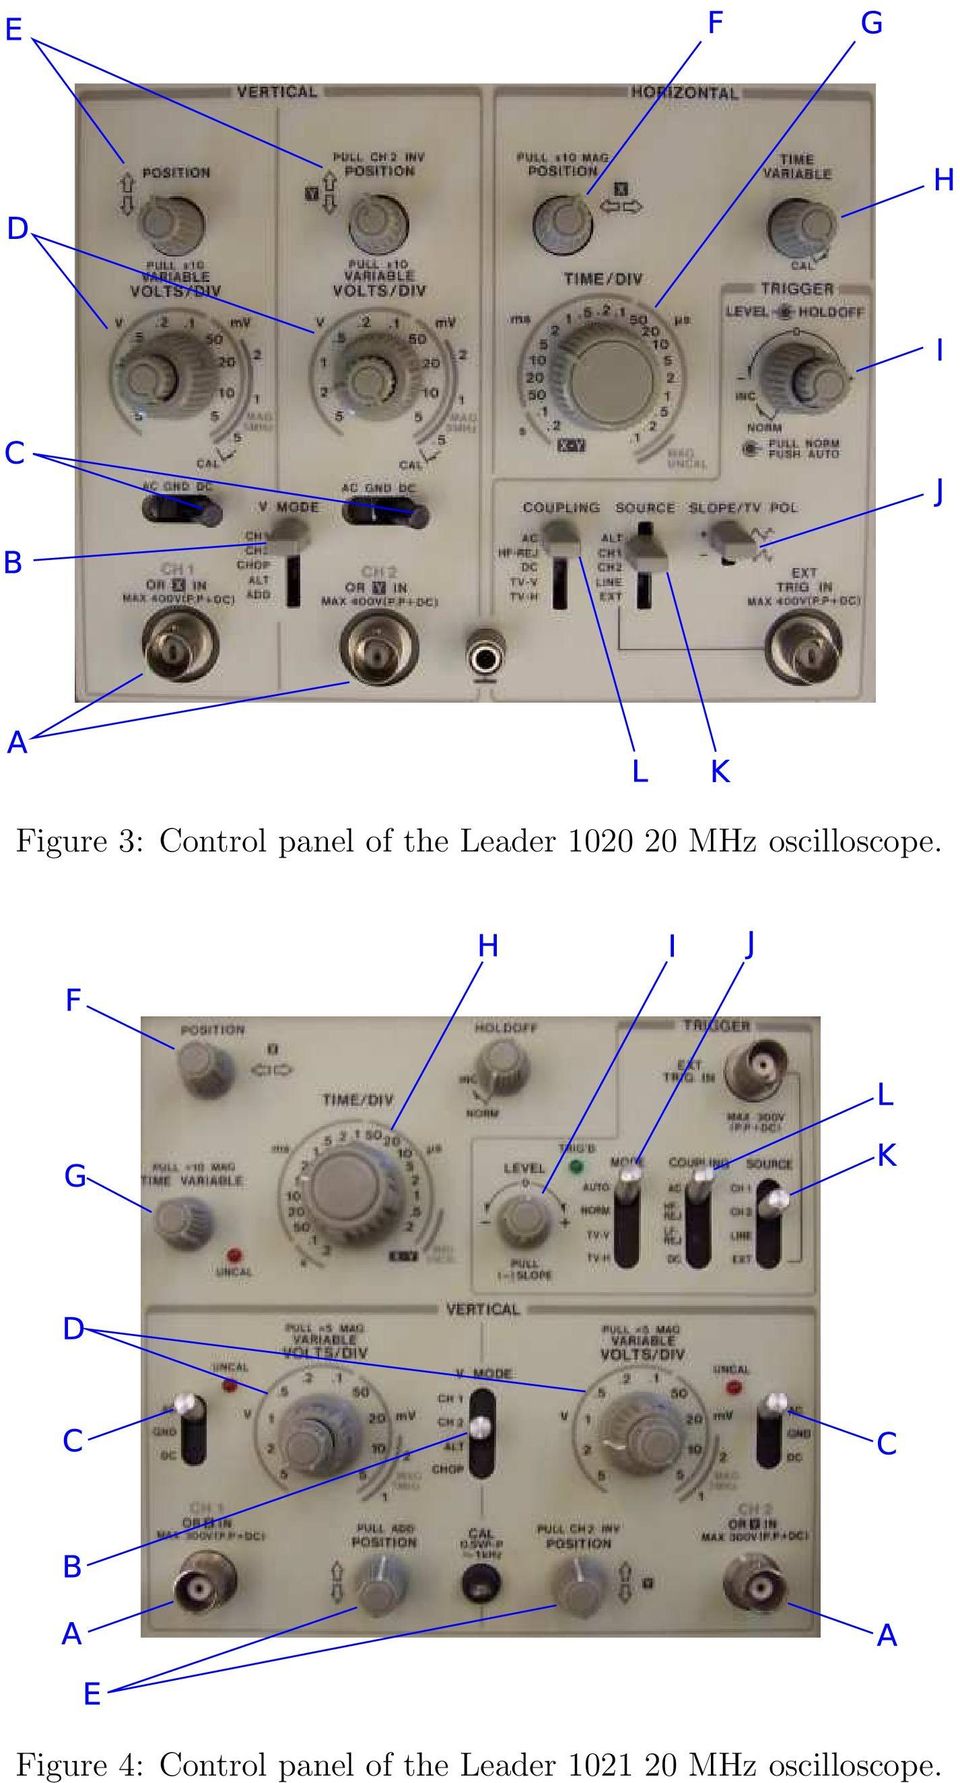 Figure 4: Control panel of the